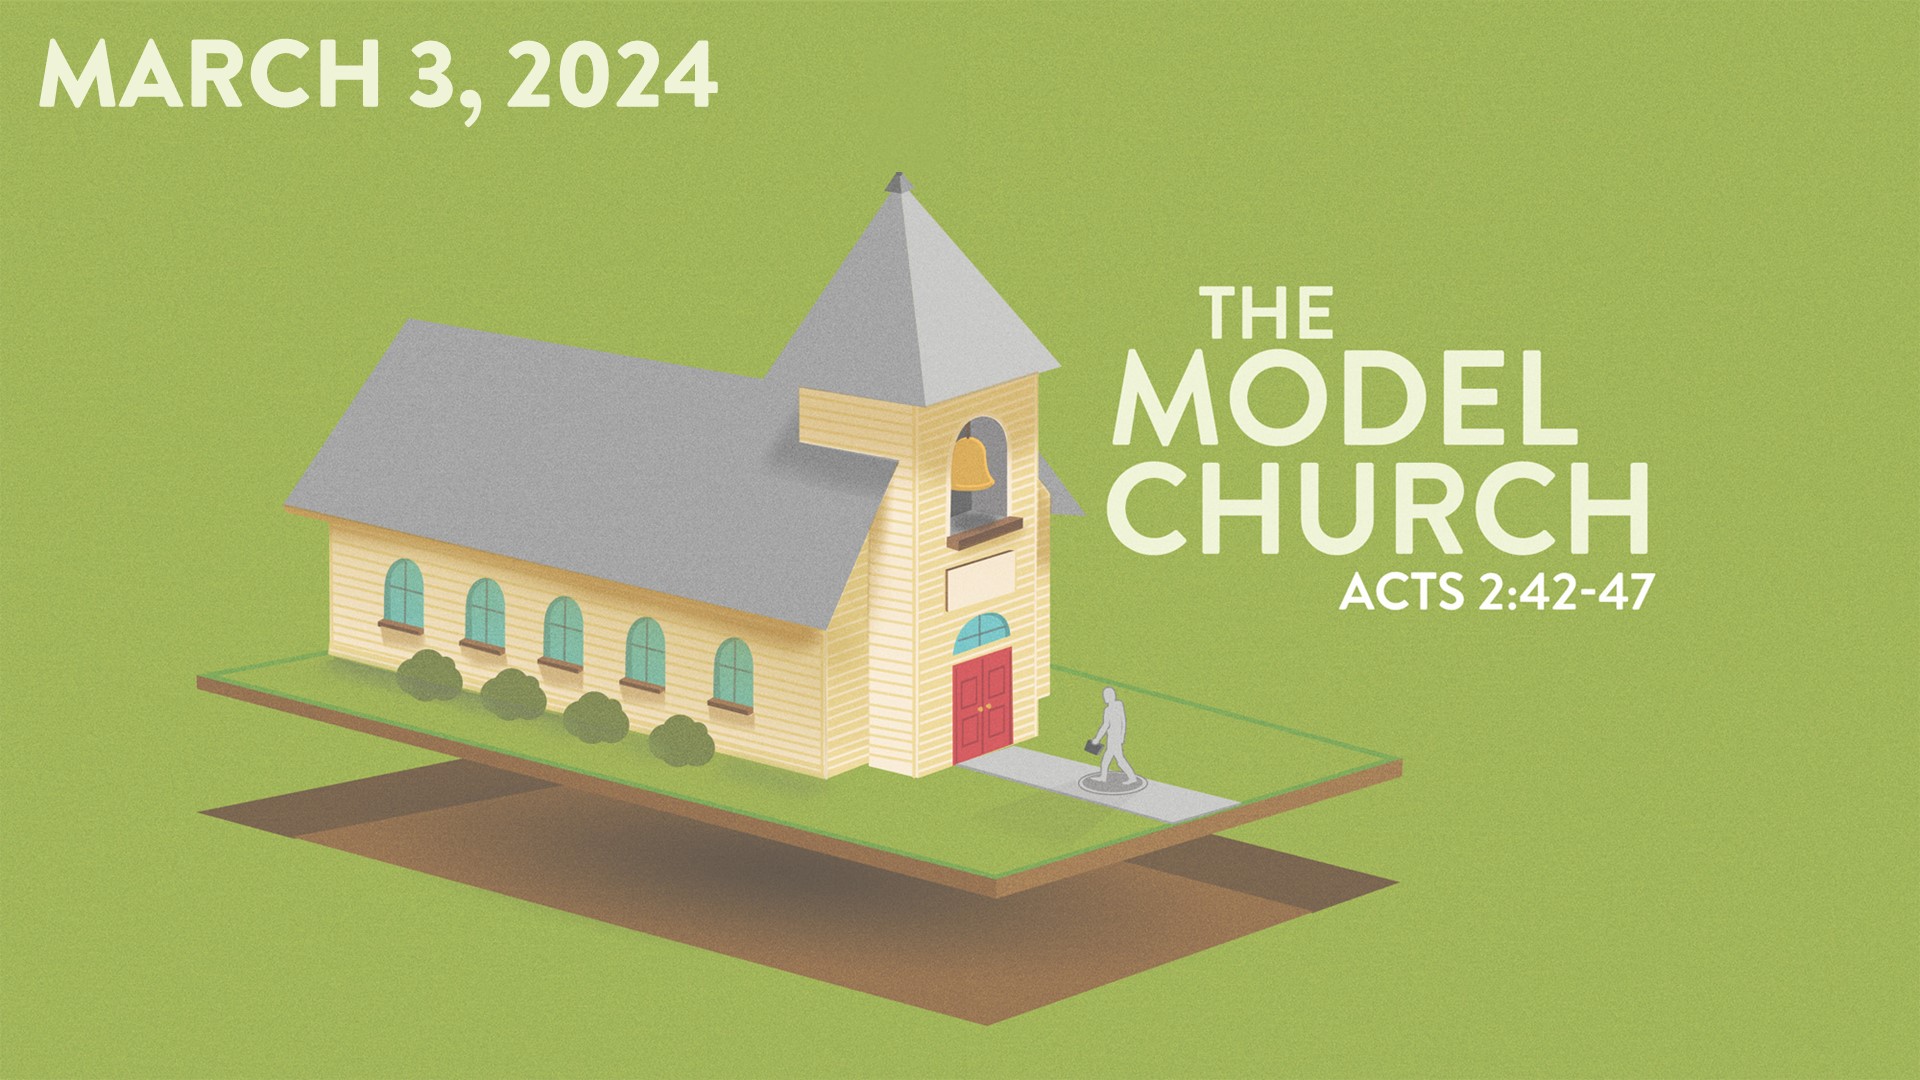 The Model Church (Acts 2:42-47)